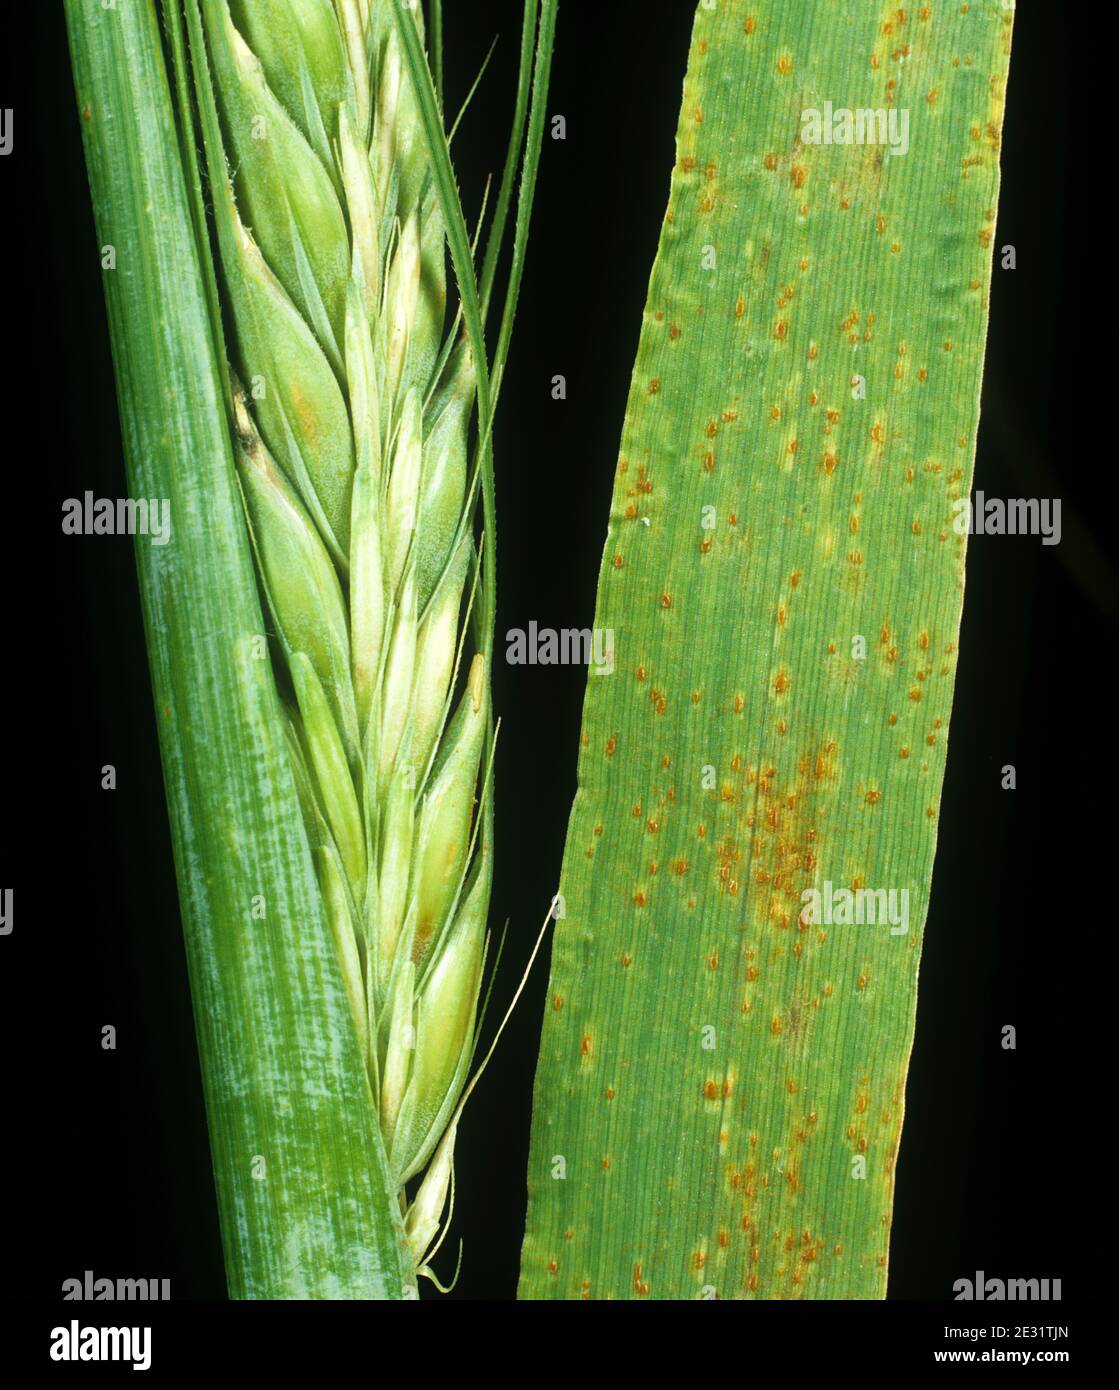 Brown rust (Puccinia hordei) pustules of infection on barley flag leaf from crop plant in ear Stock Photo